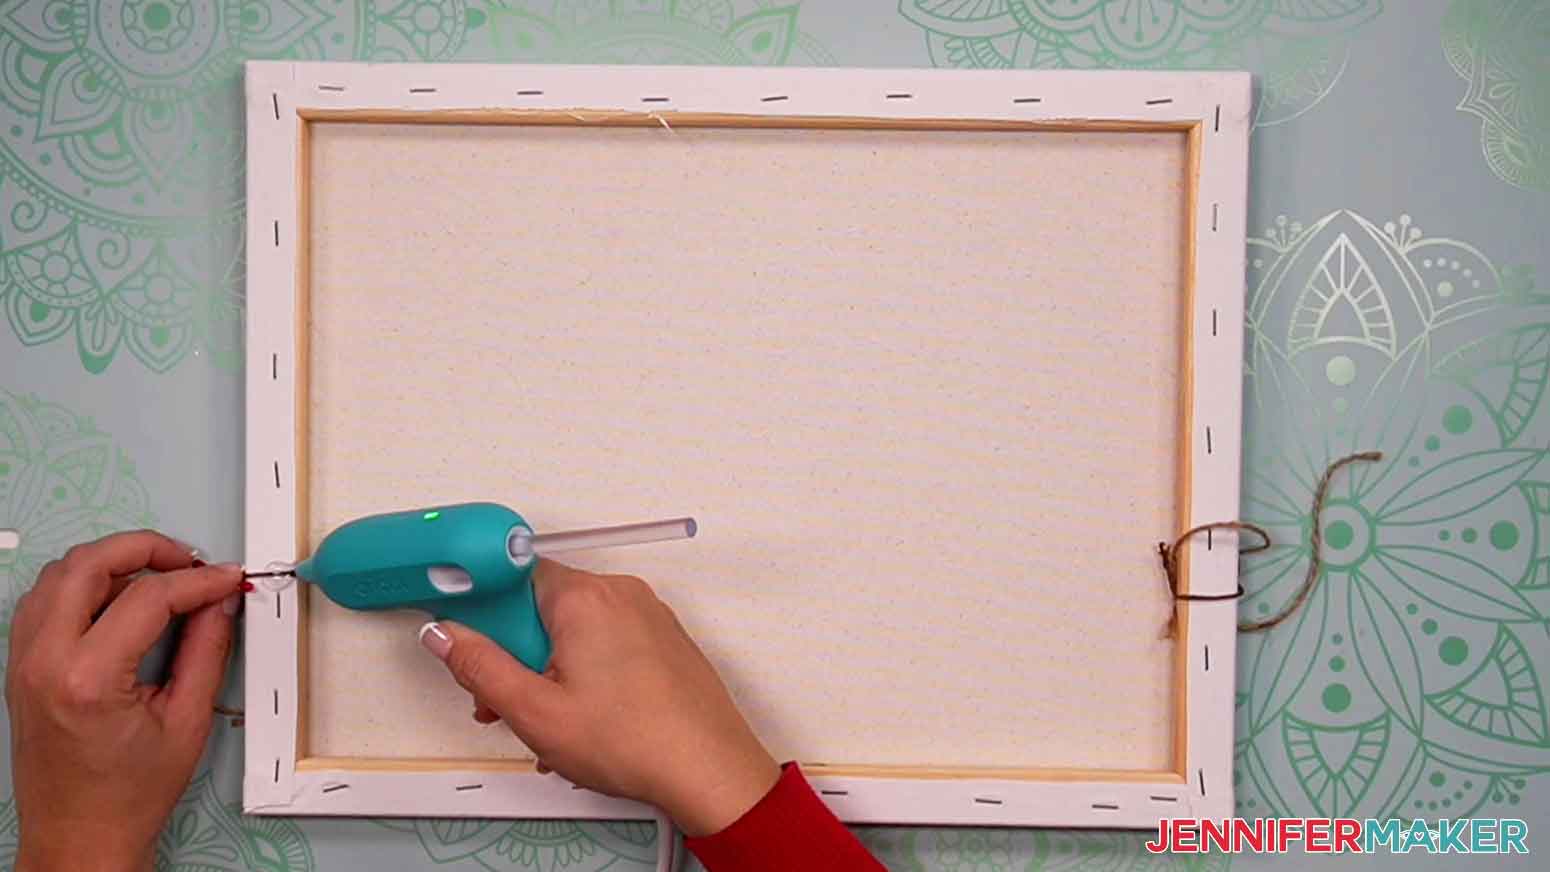 Use hot glue to hold the ends of the berry garland in place on the back of the canvas.